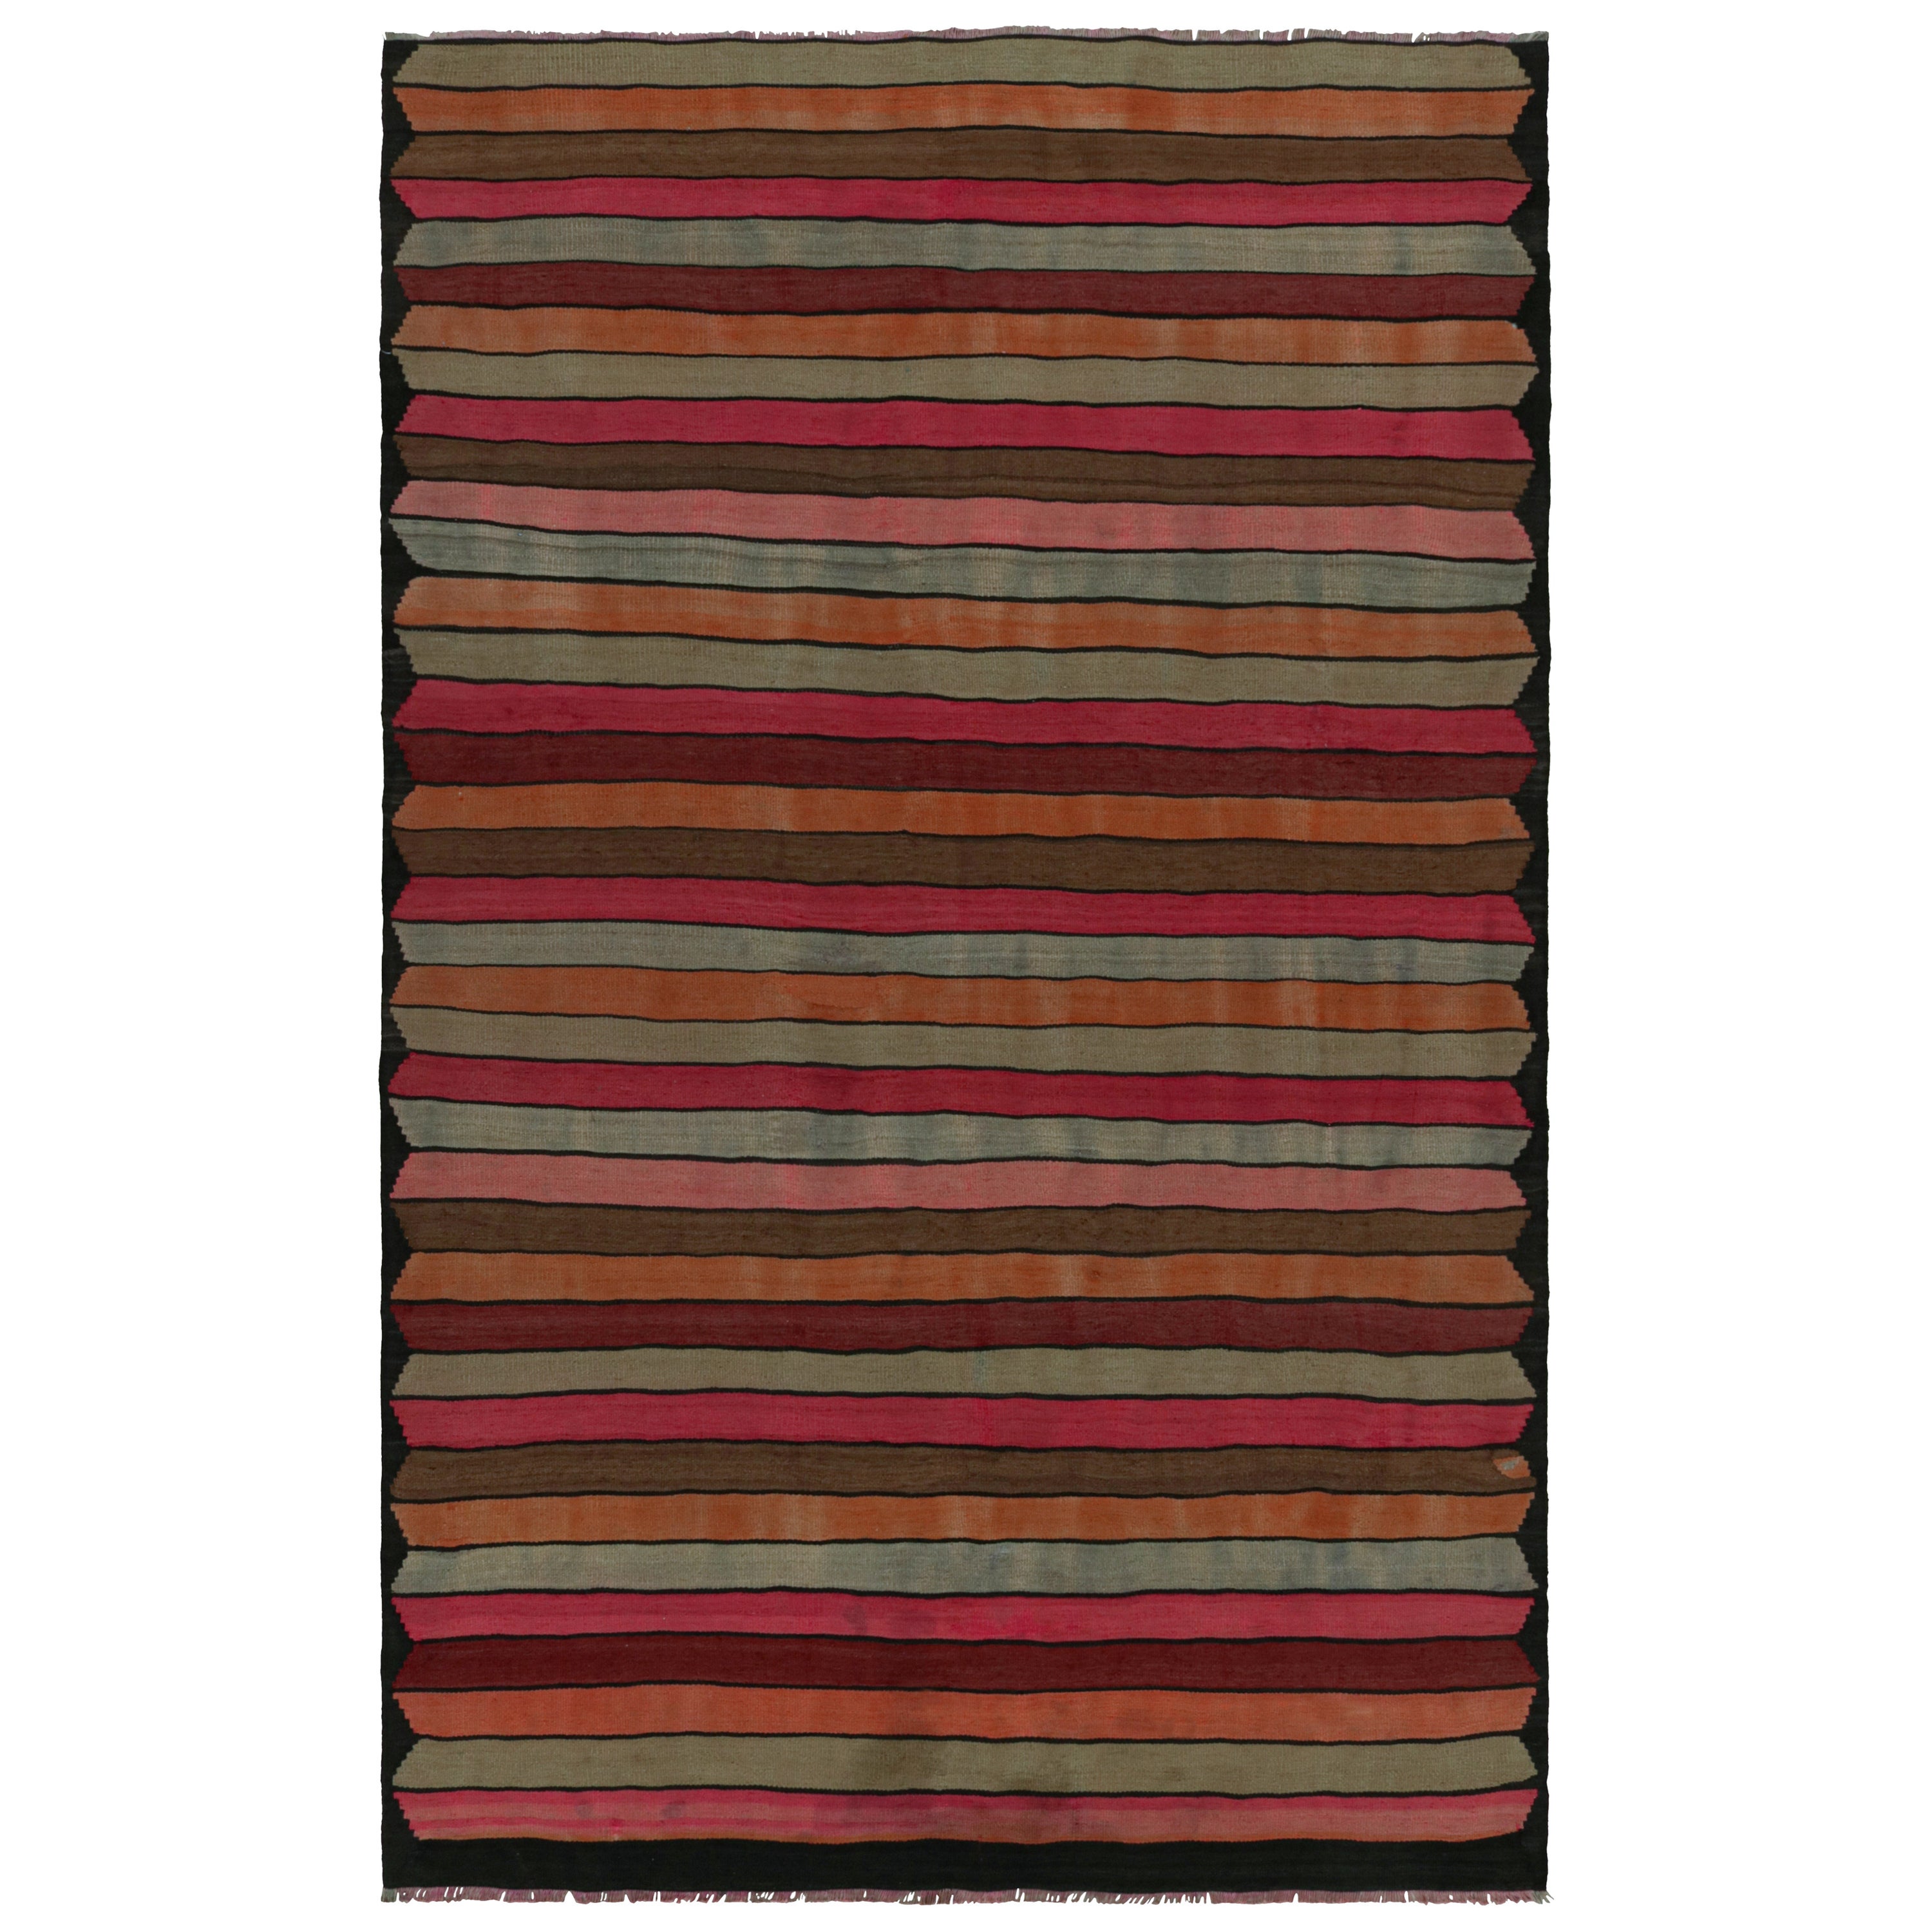 Vintage Persian tribal Kilim rug, with Stripes, from Rug & Kilim For Sale